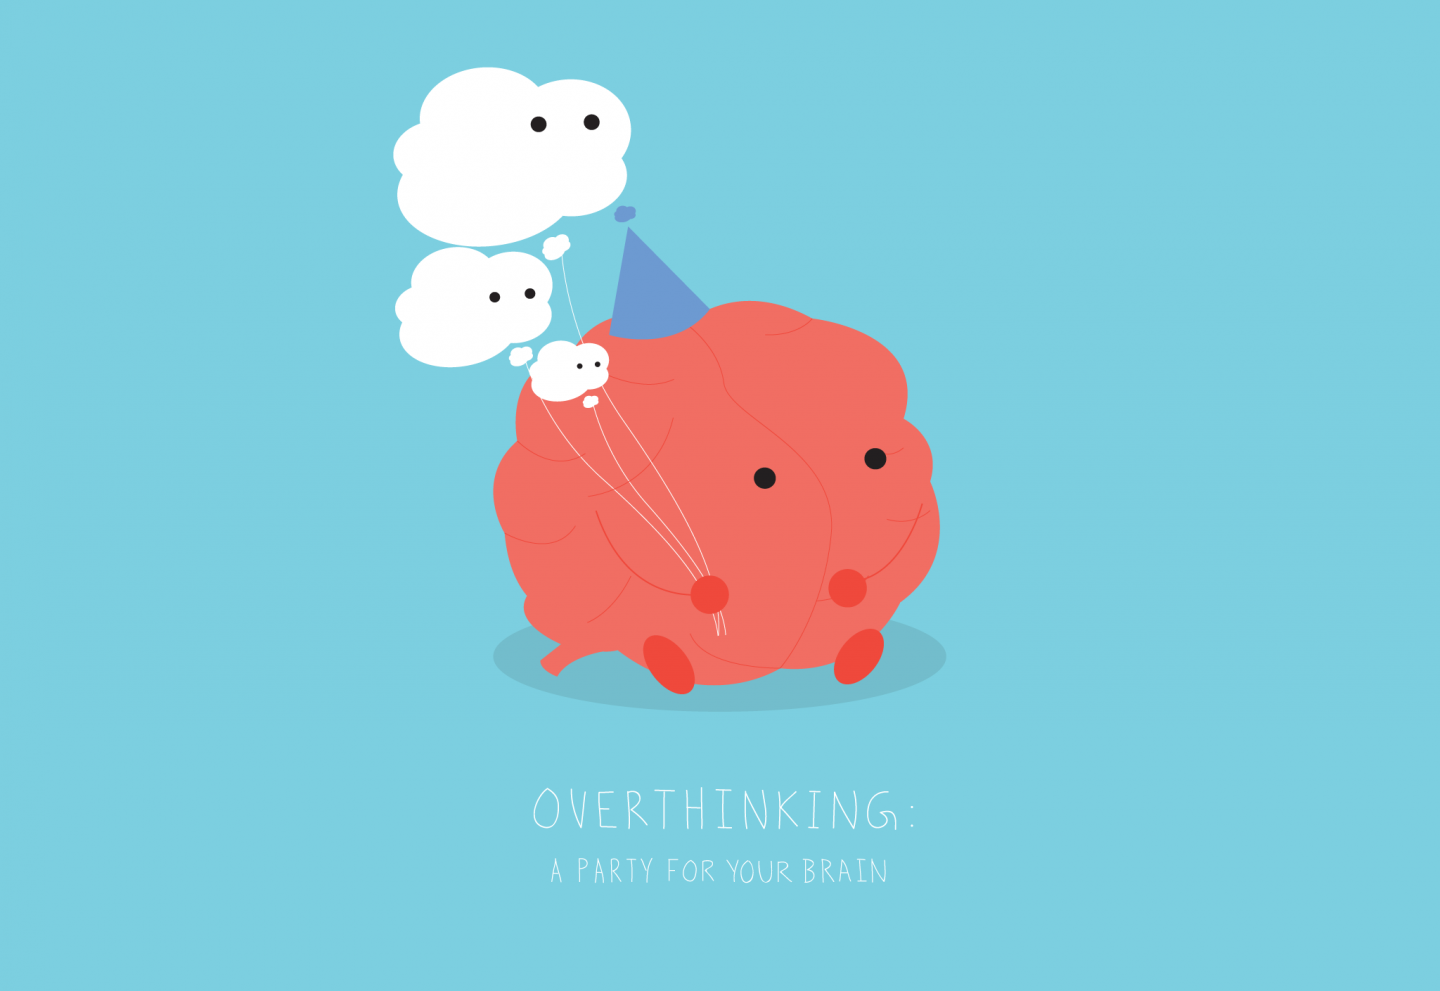 Overthinking: Give your brain some company